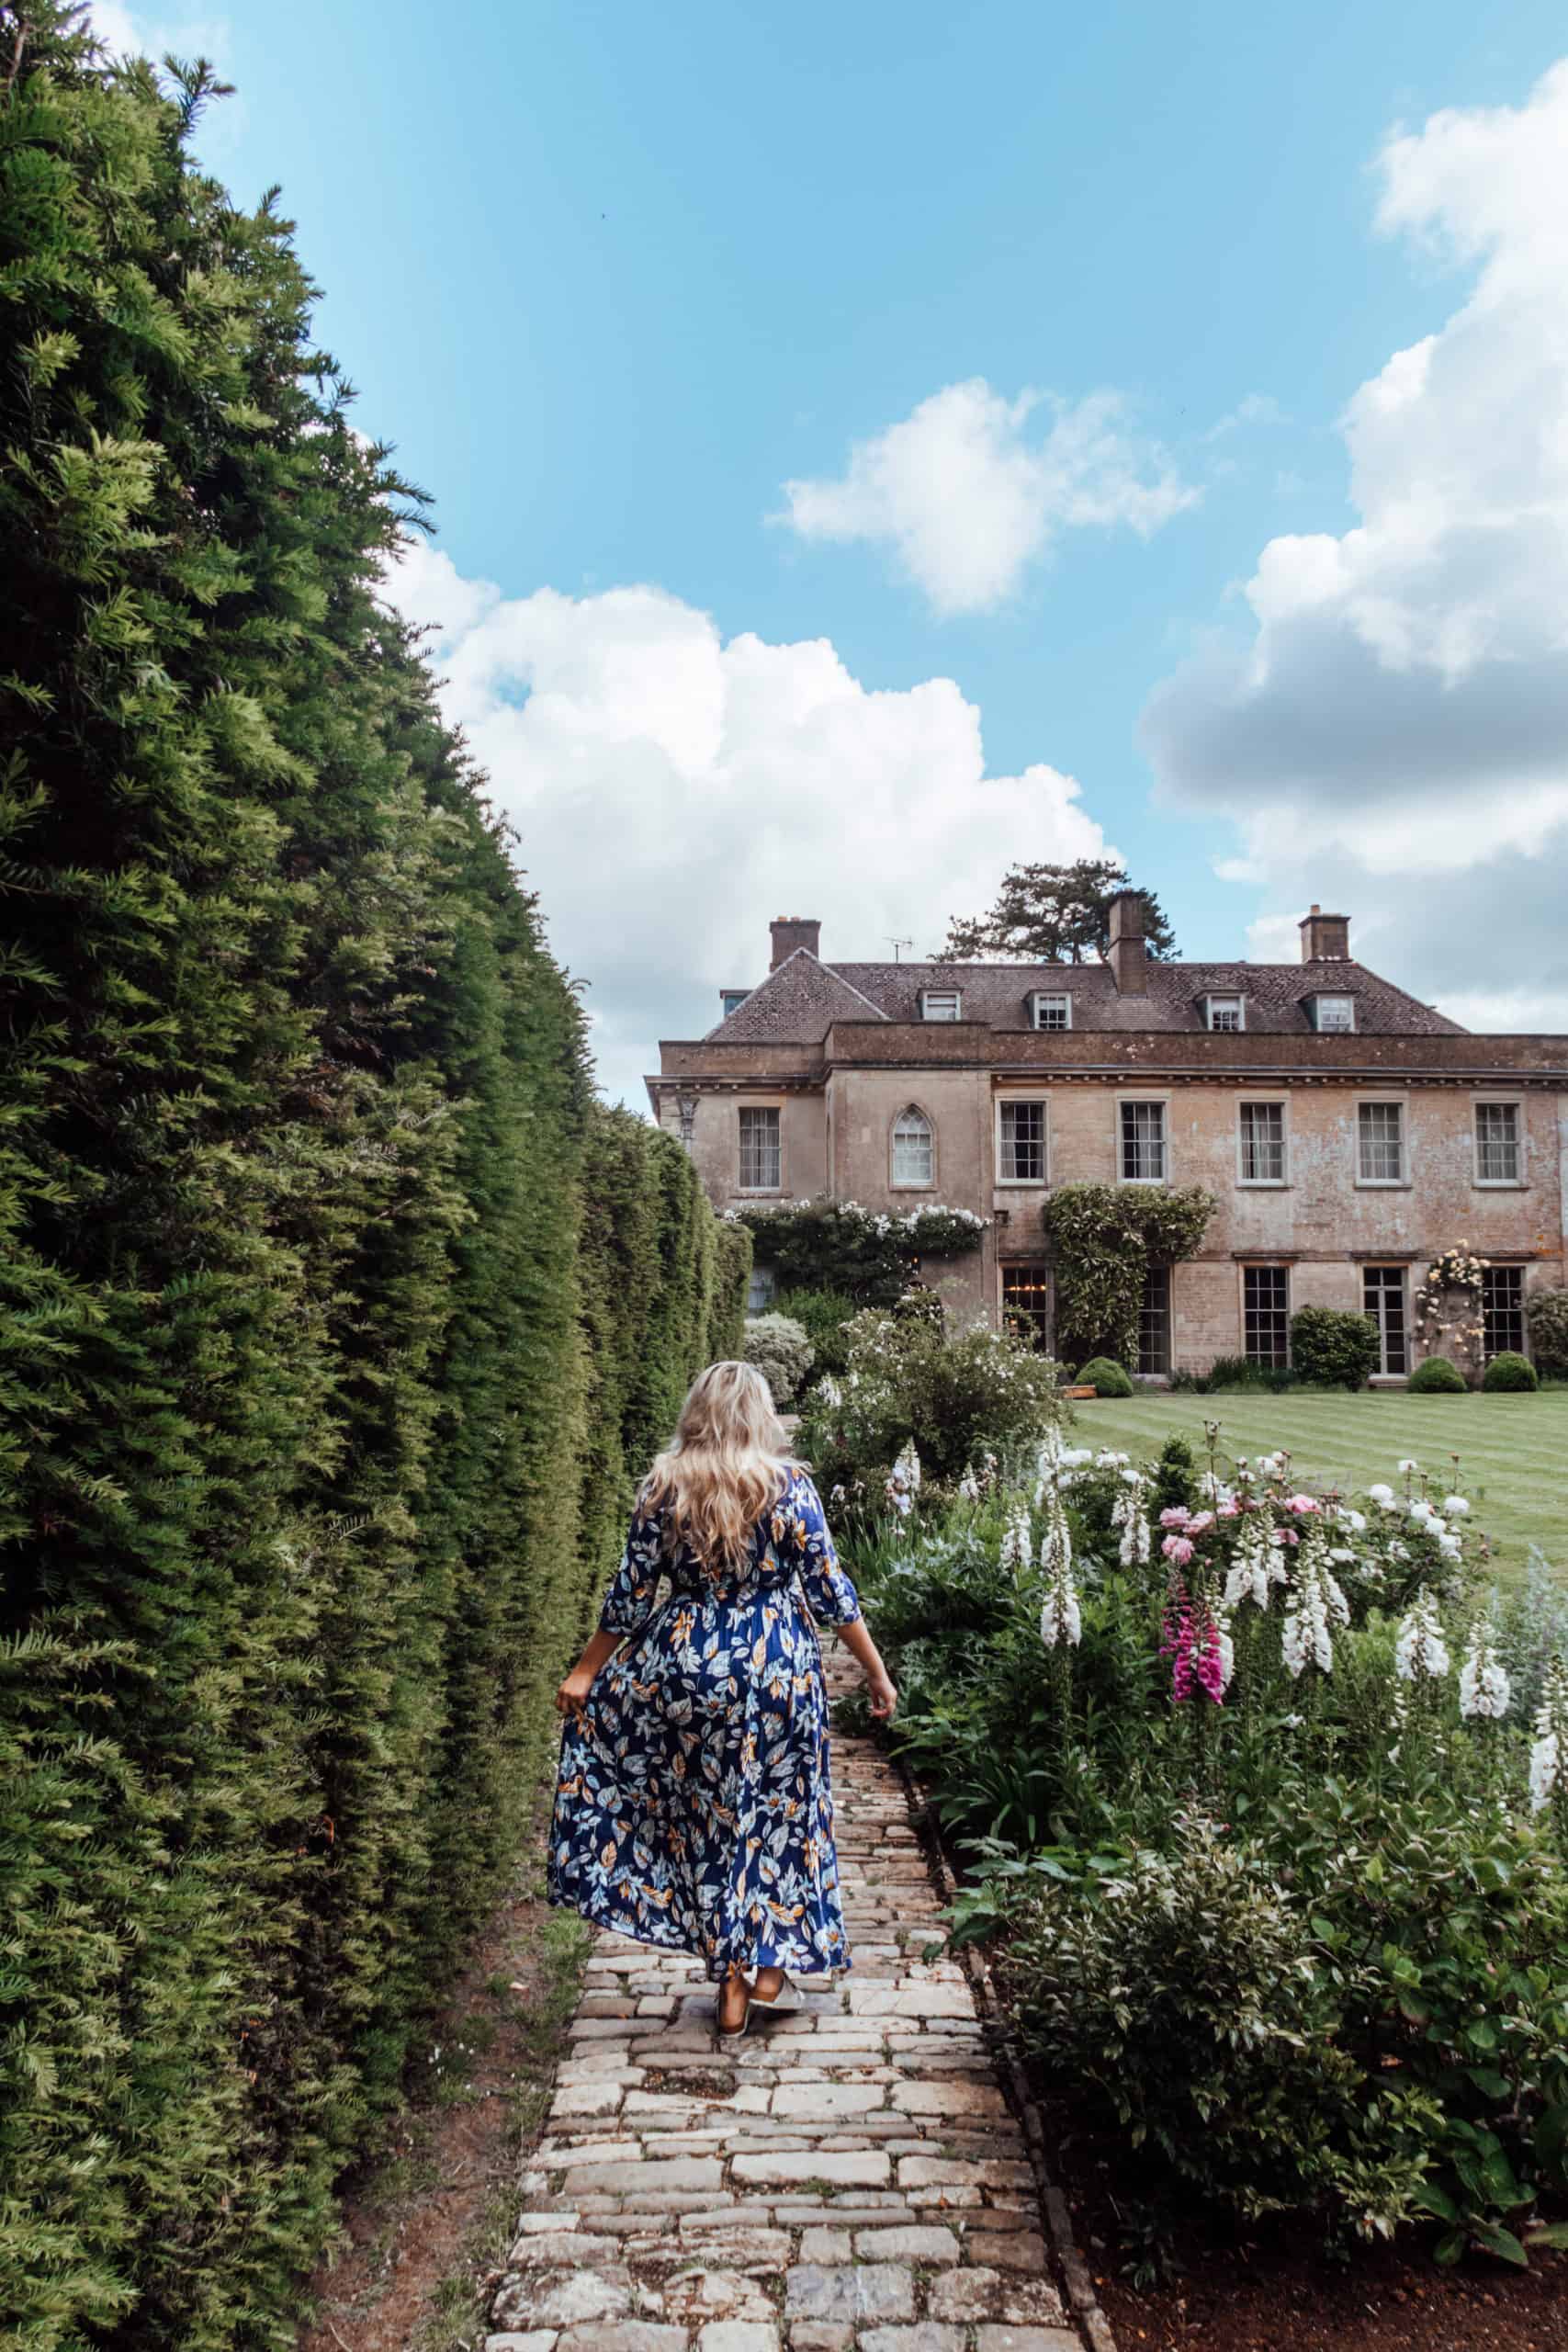 Outside of Babington House in the English Countryside | The Cotswolds in 20 Photos